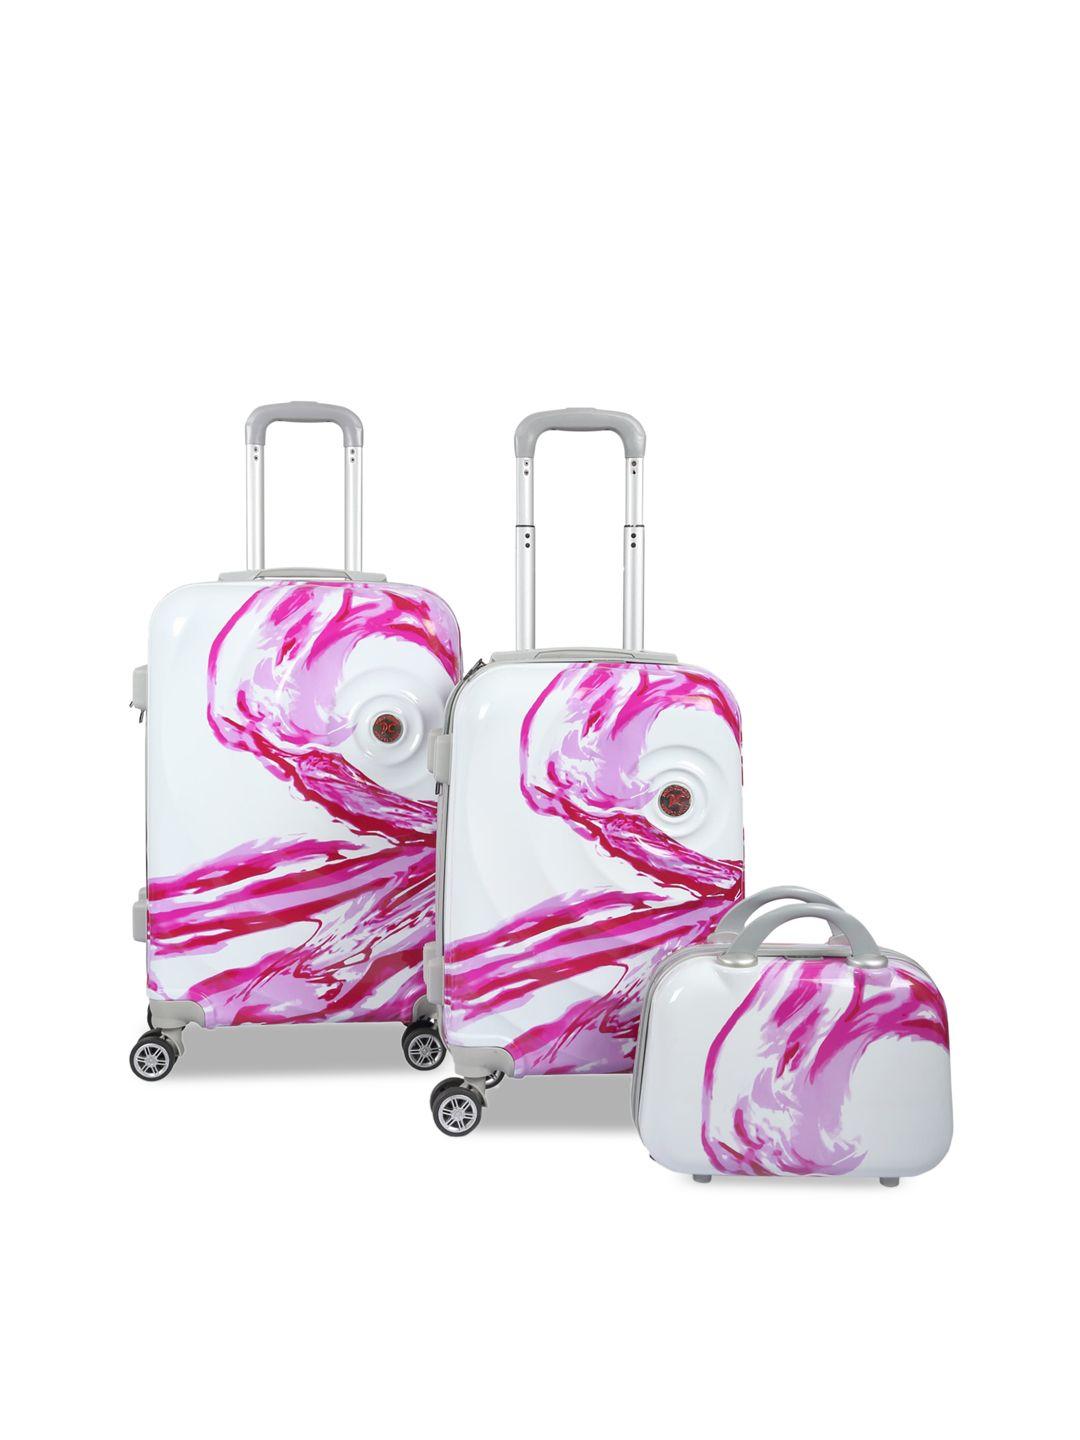 polo class unisex set of 3 pink & white printed trolley & vanity bags